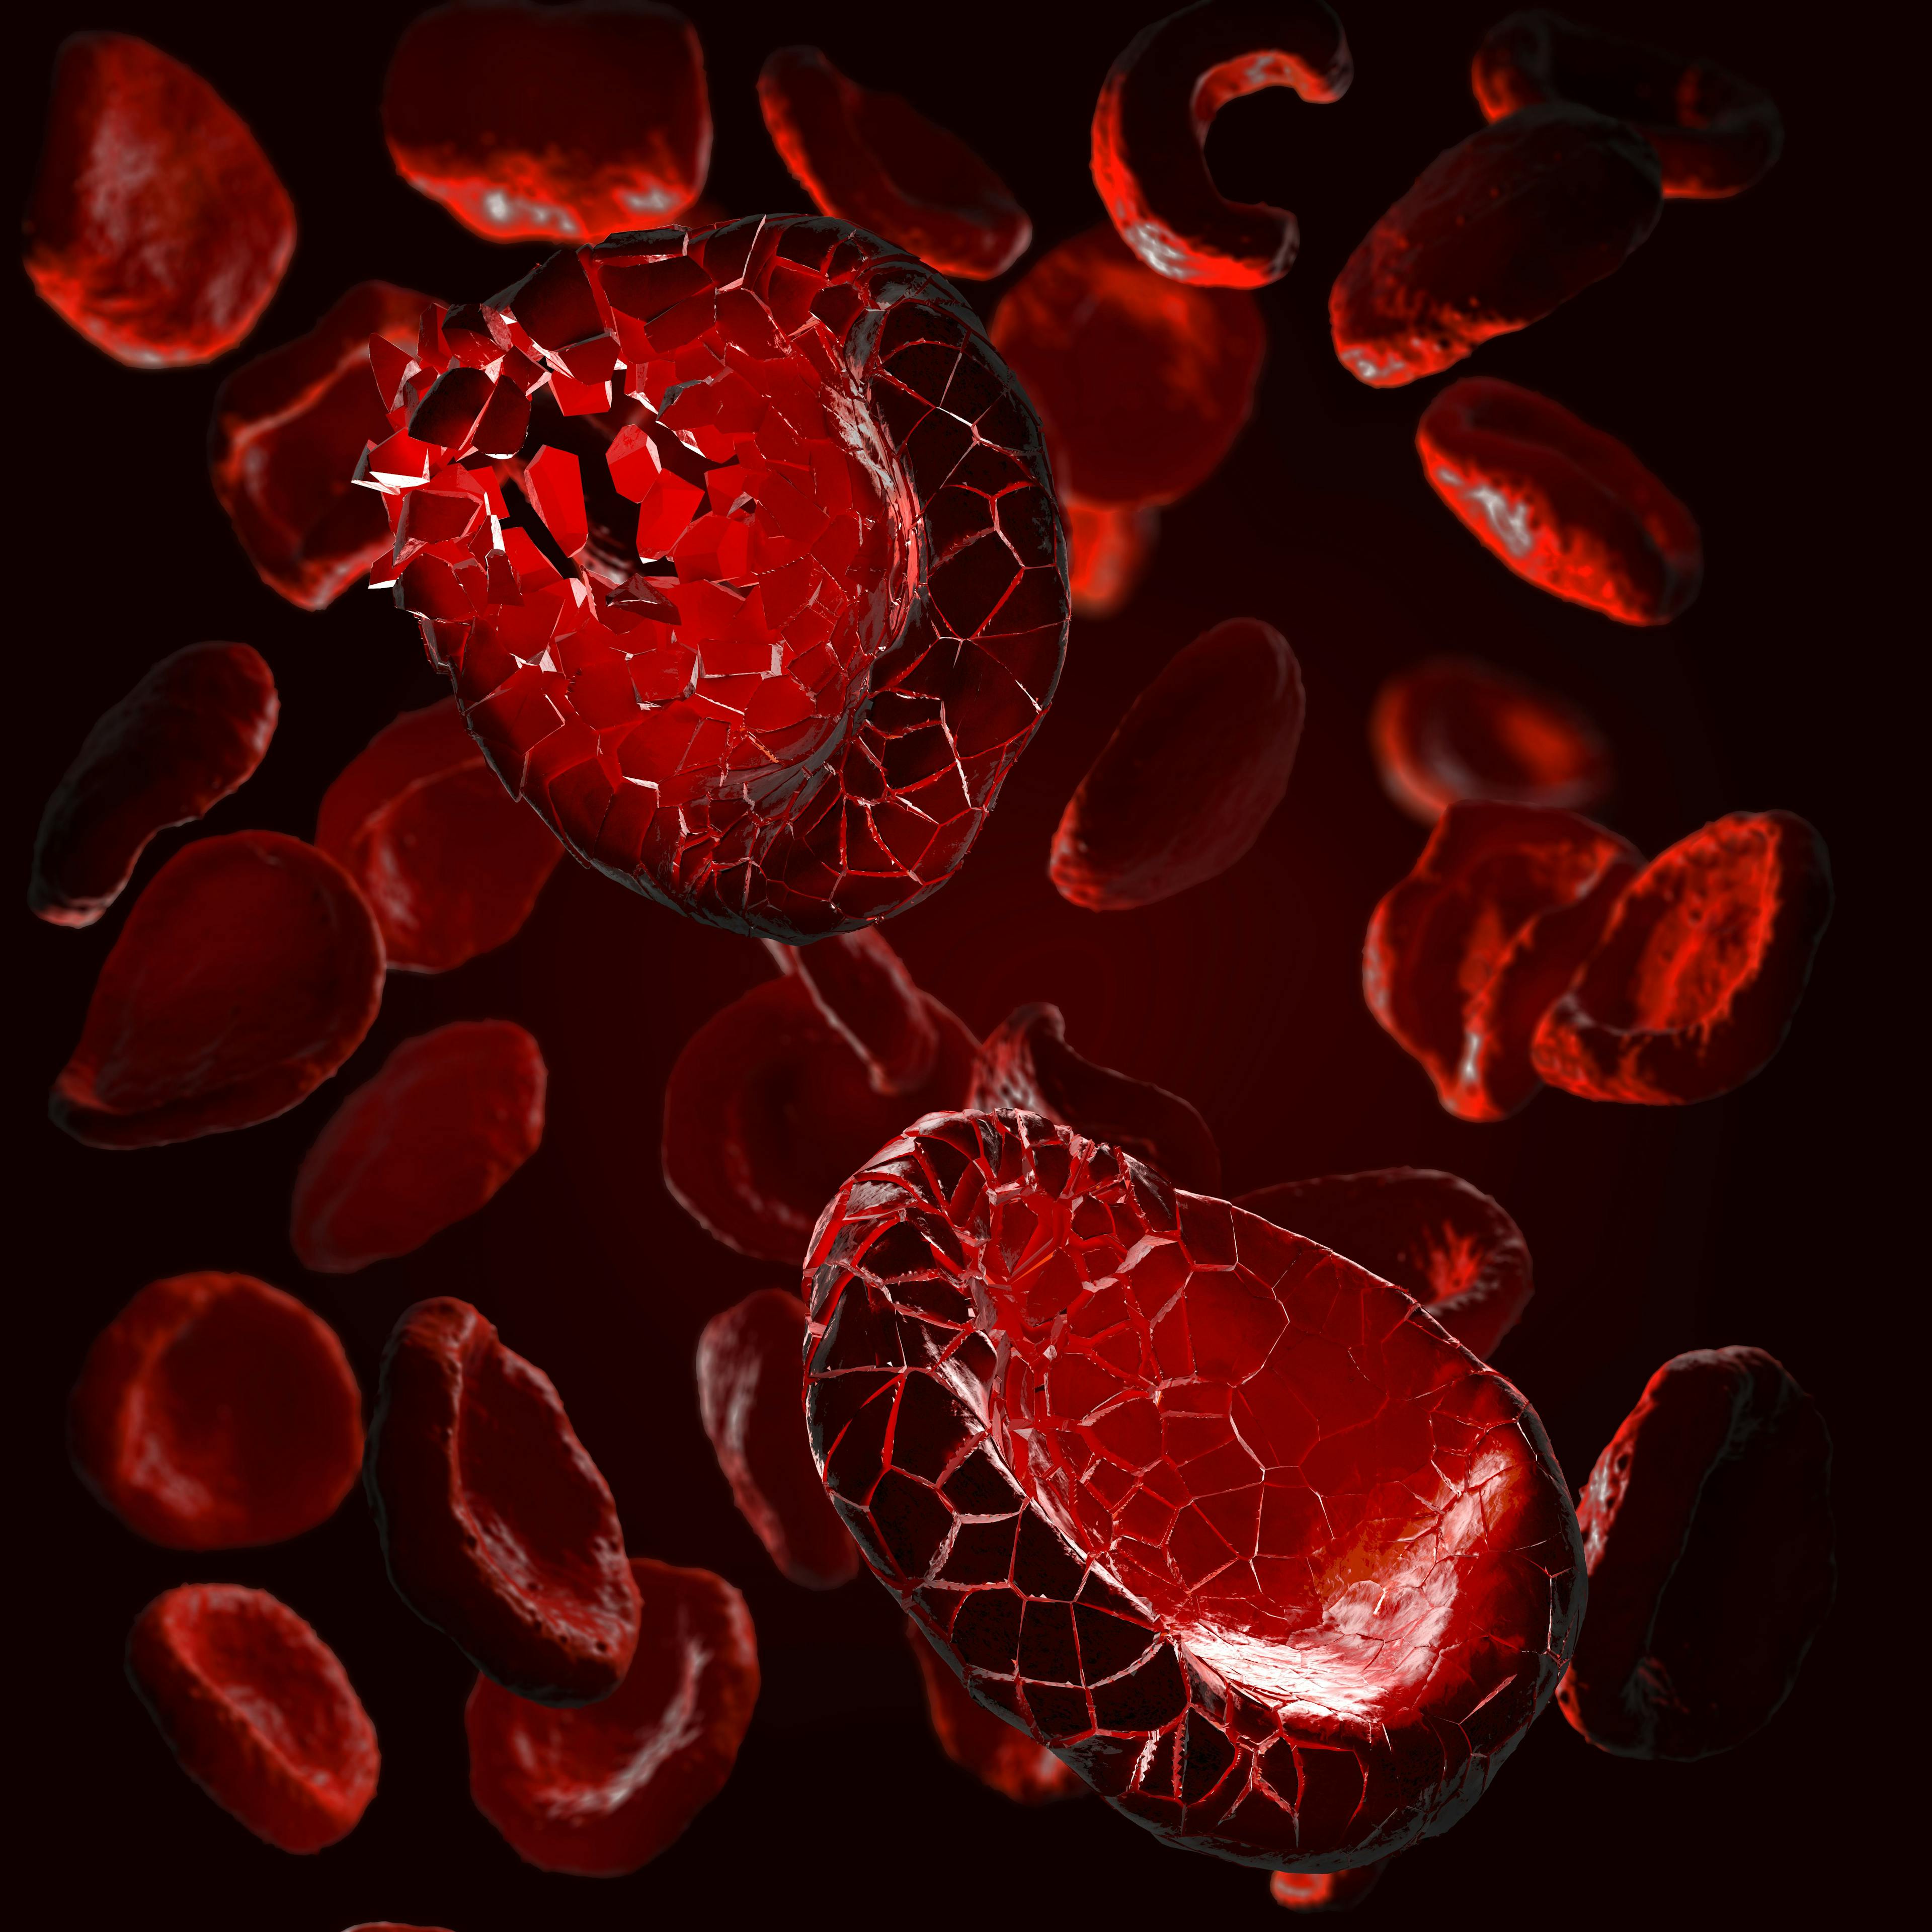 Image of blood cells coming apart